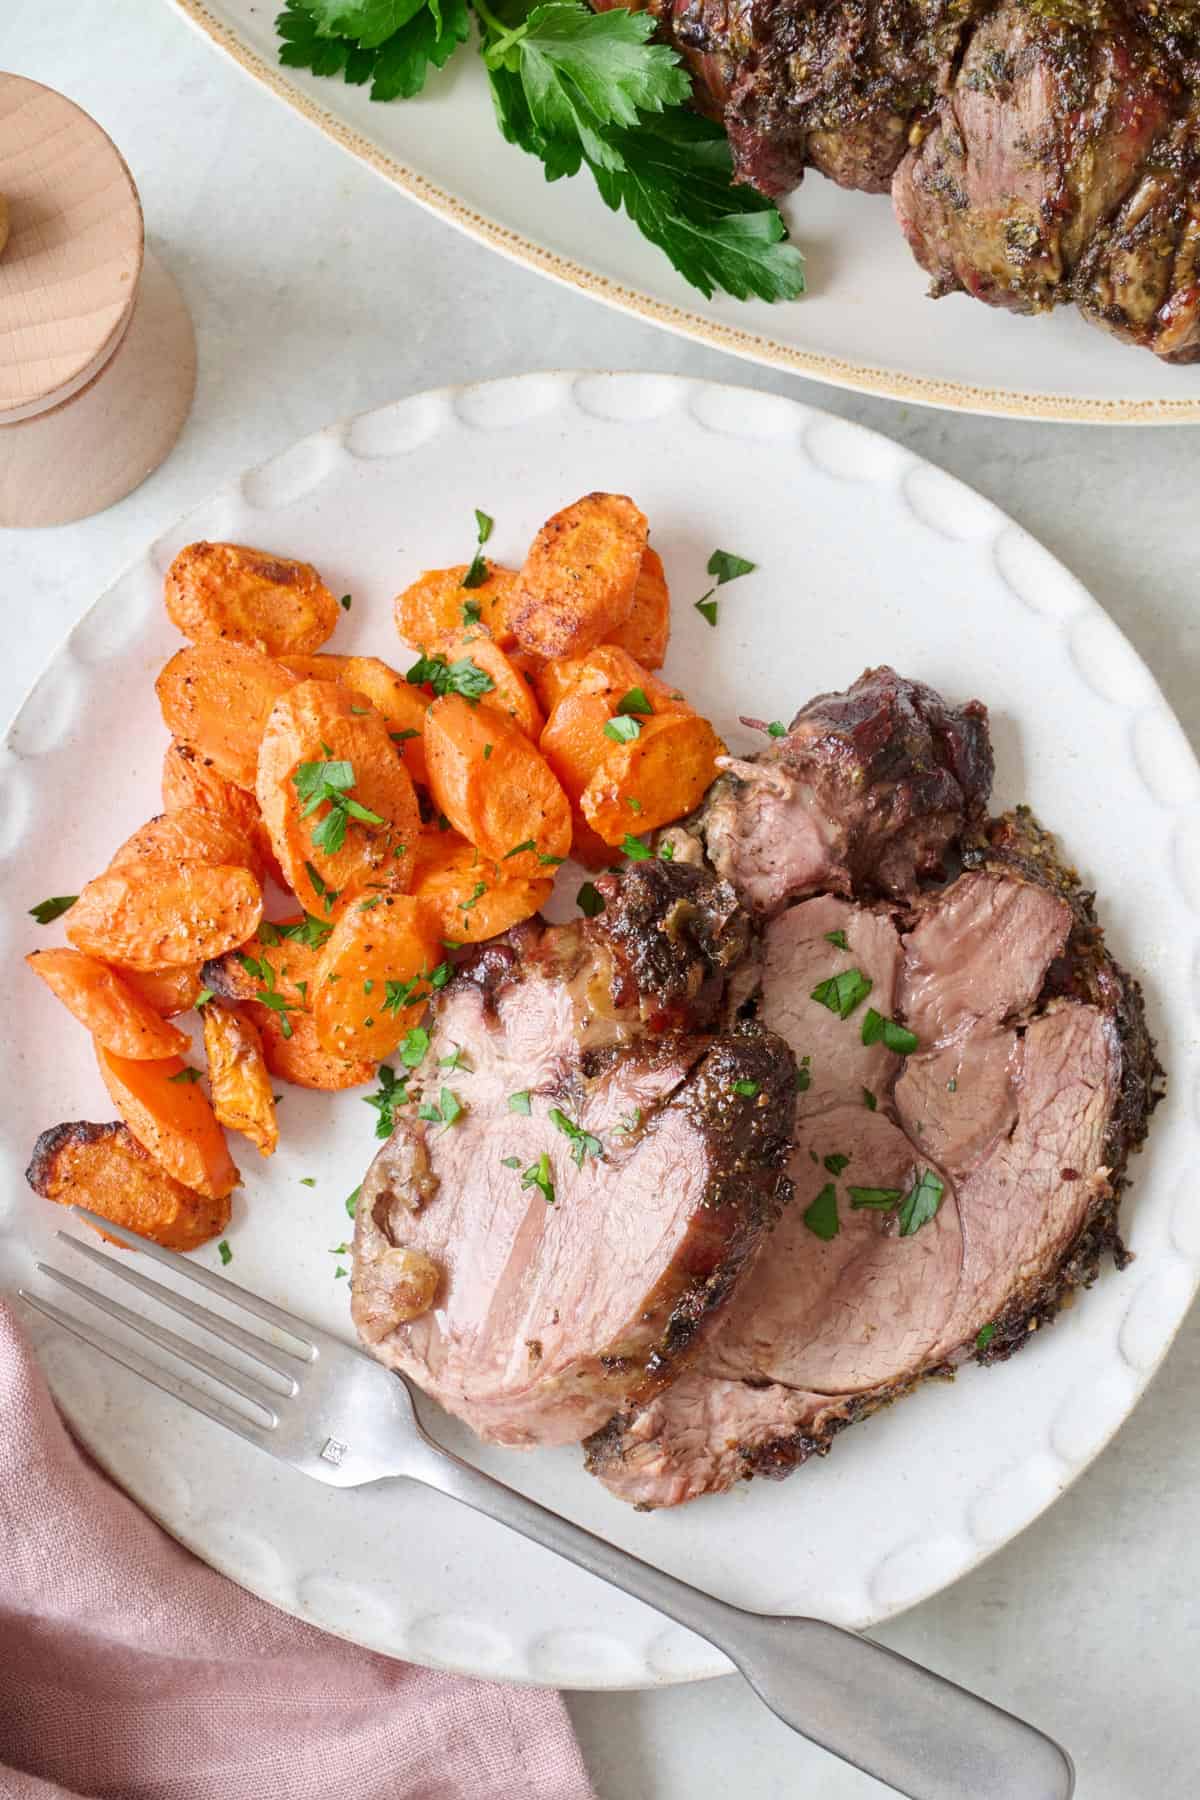 Slices of roasted leg of lamb on a white plate with roasted carrots and a fork.